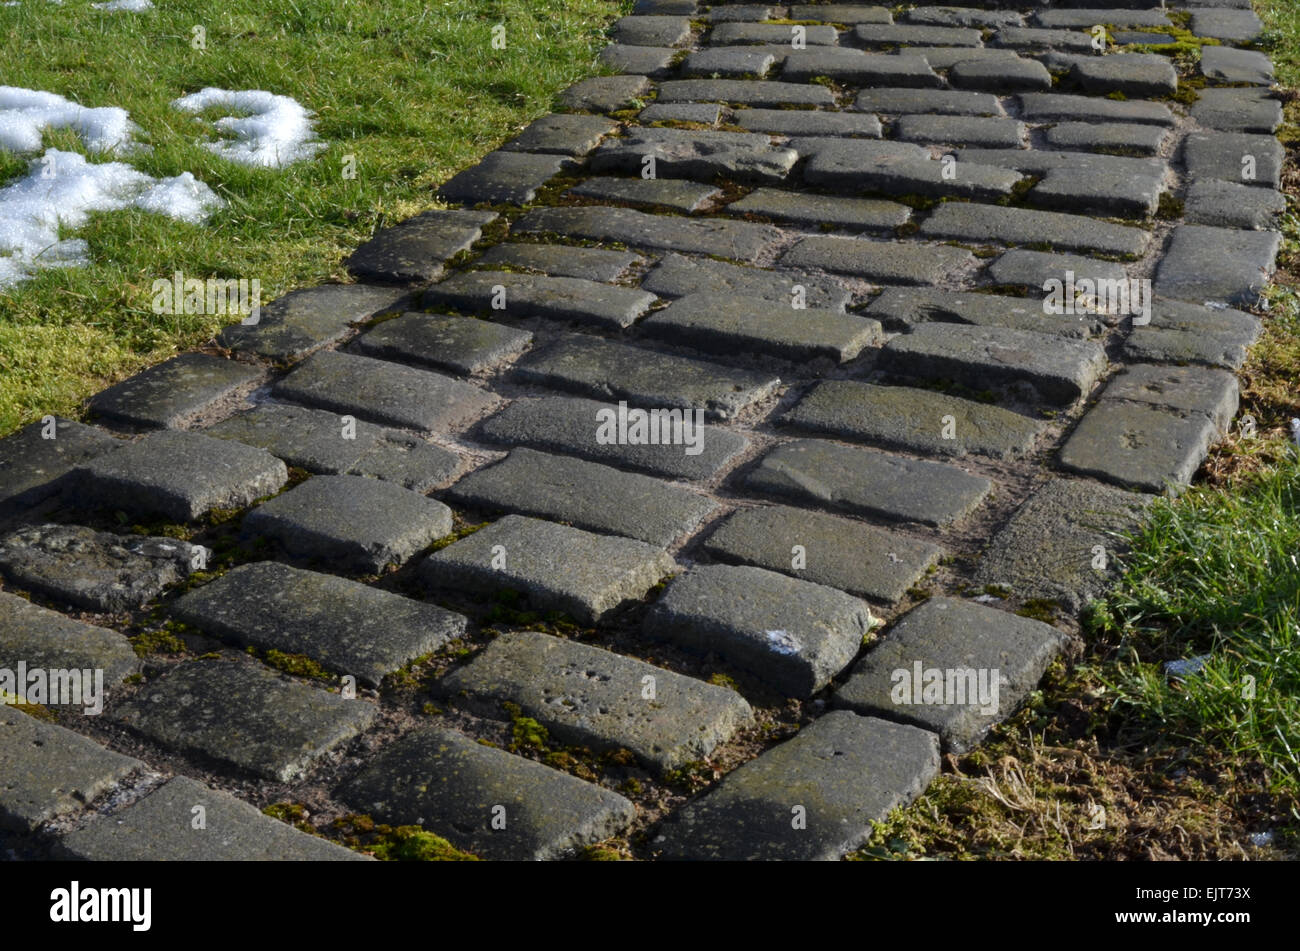 Cobbled pathway at the locks on the Forth & Clyde to give purchase to the lock keepers feet when they swing open the large gates Stock Photo